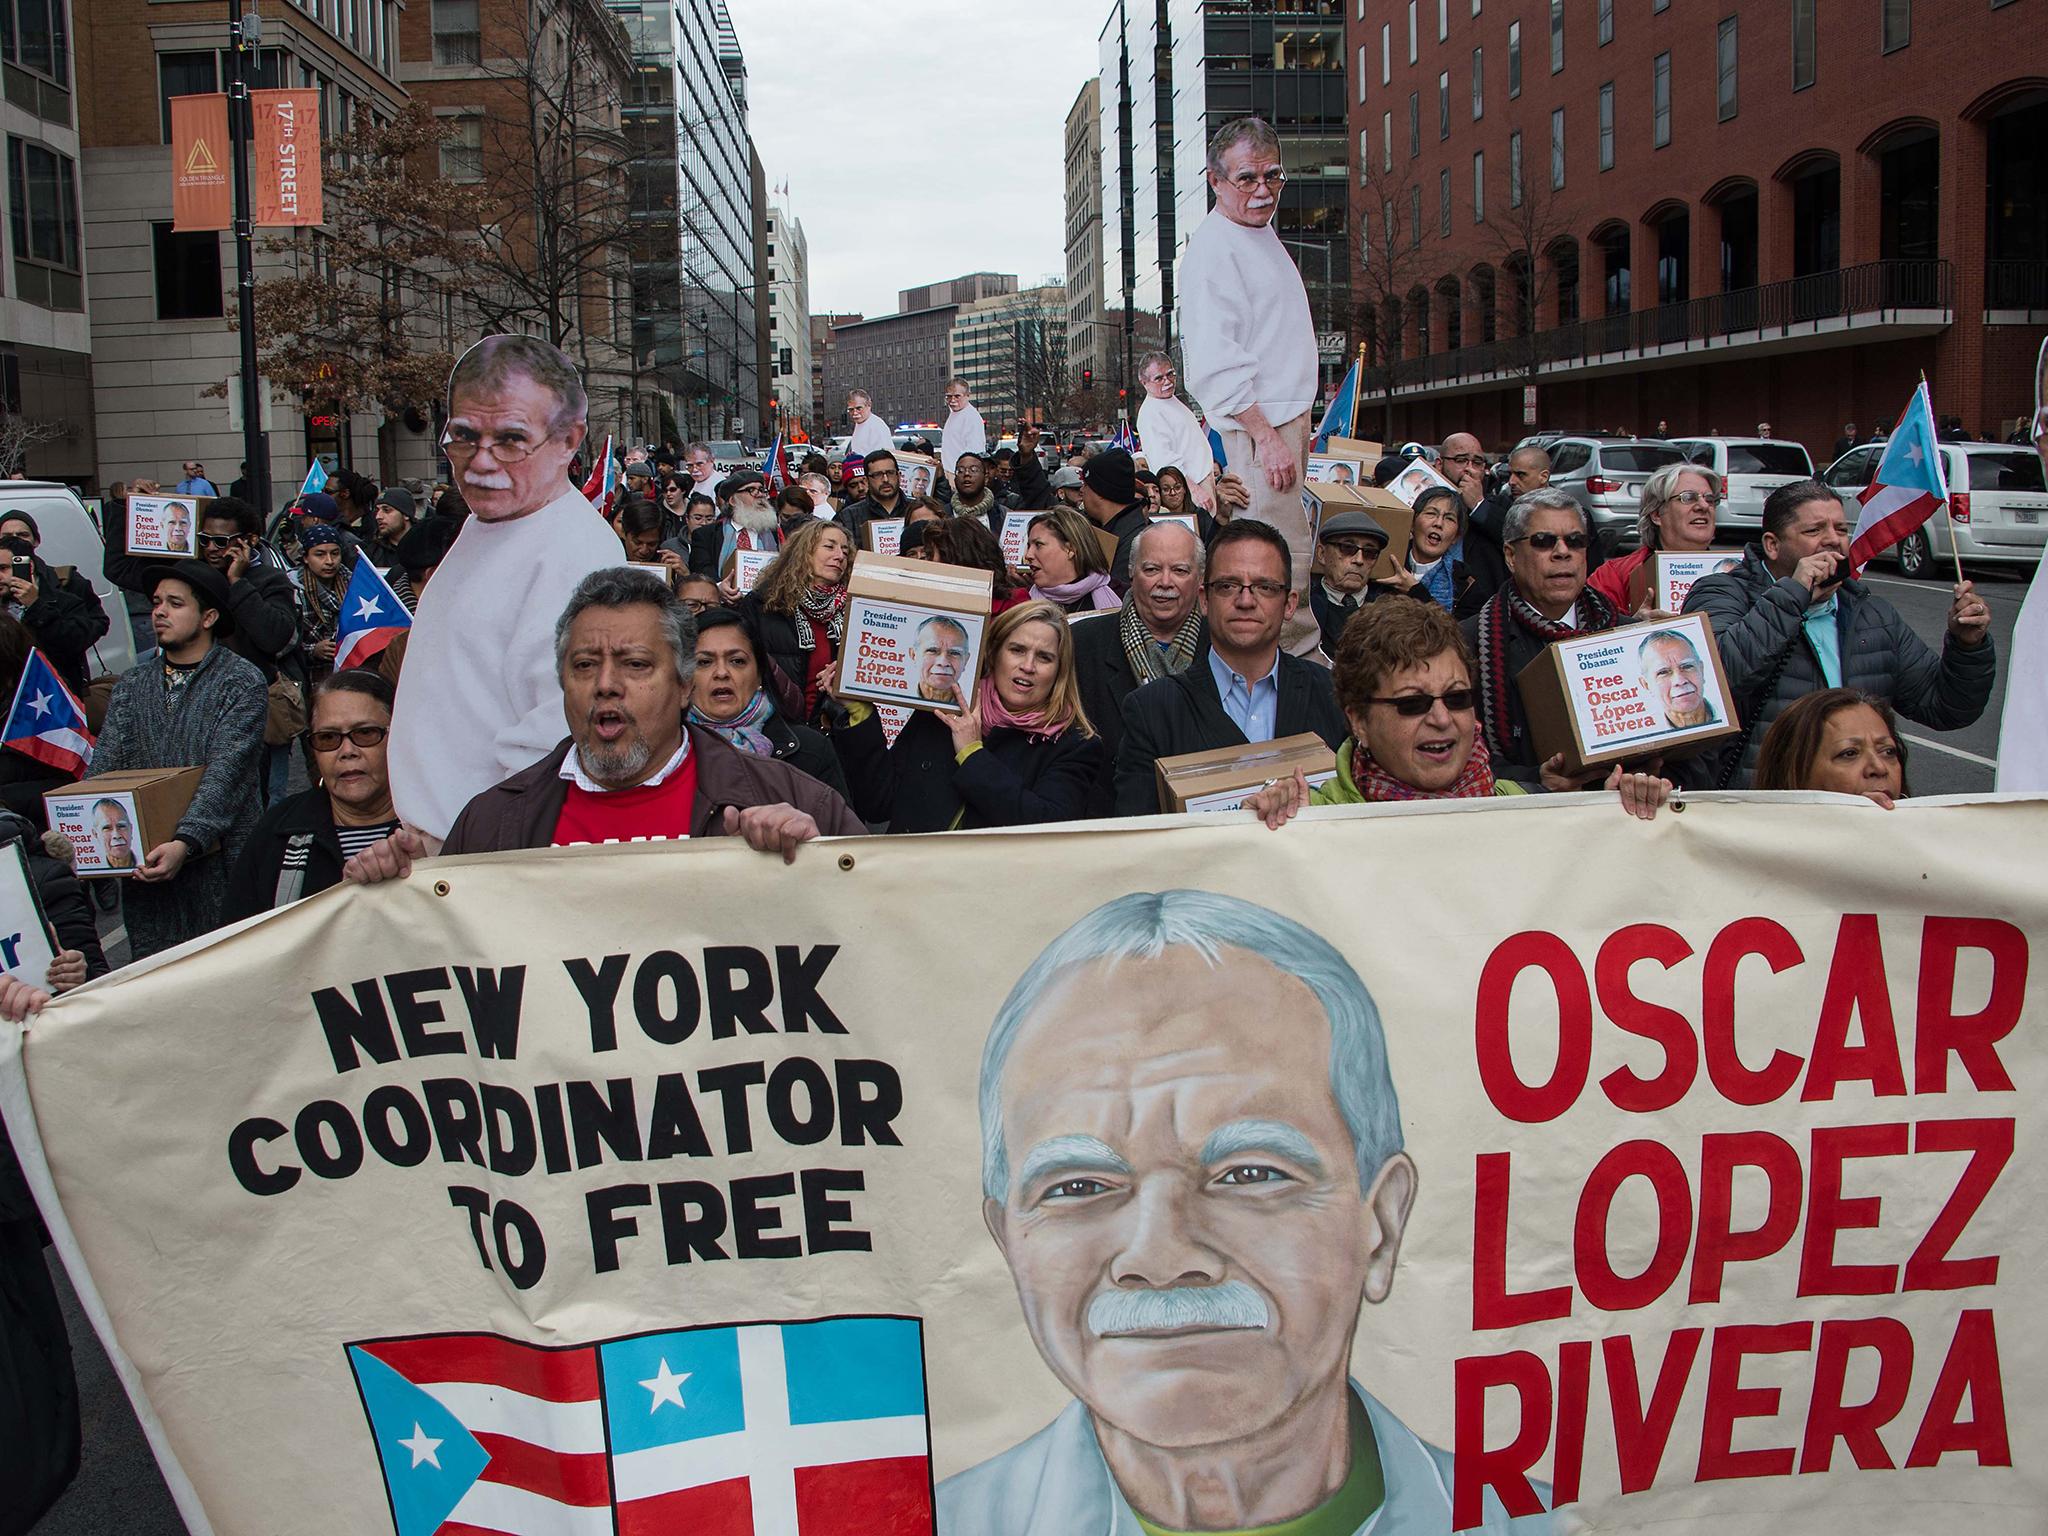 Campaigners have fought for many years to secure the release of Oscar Lopez Rivera